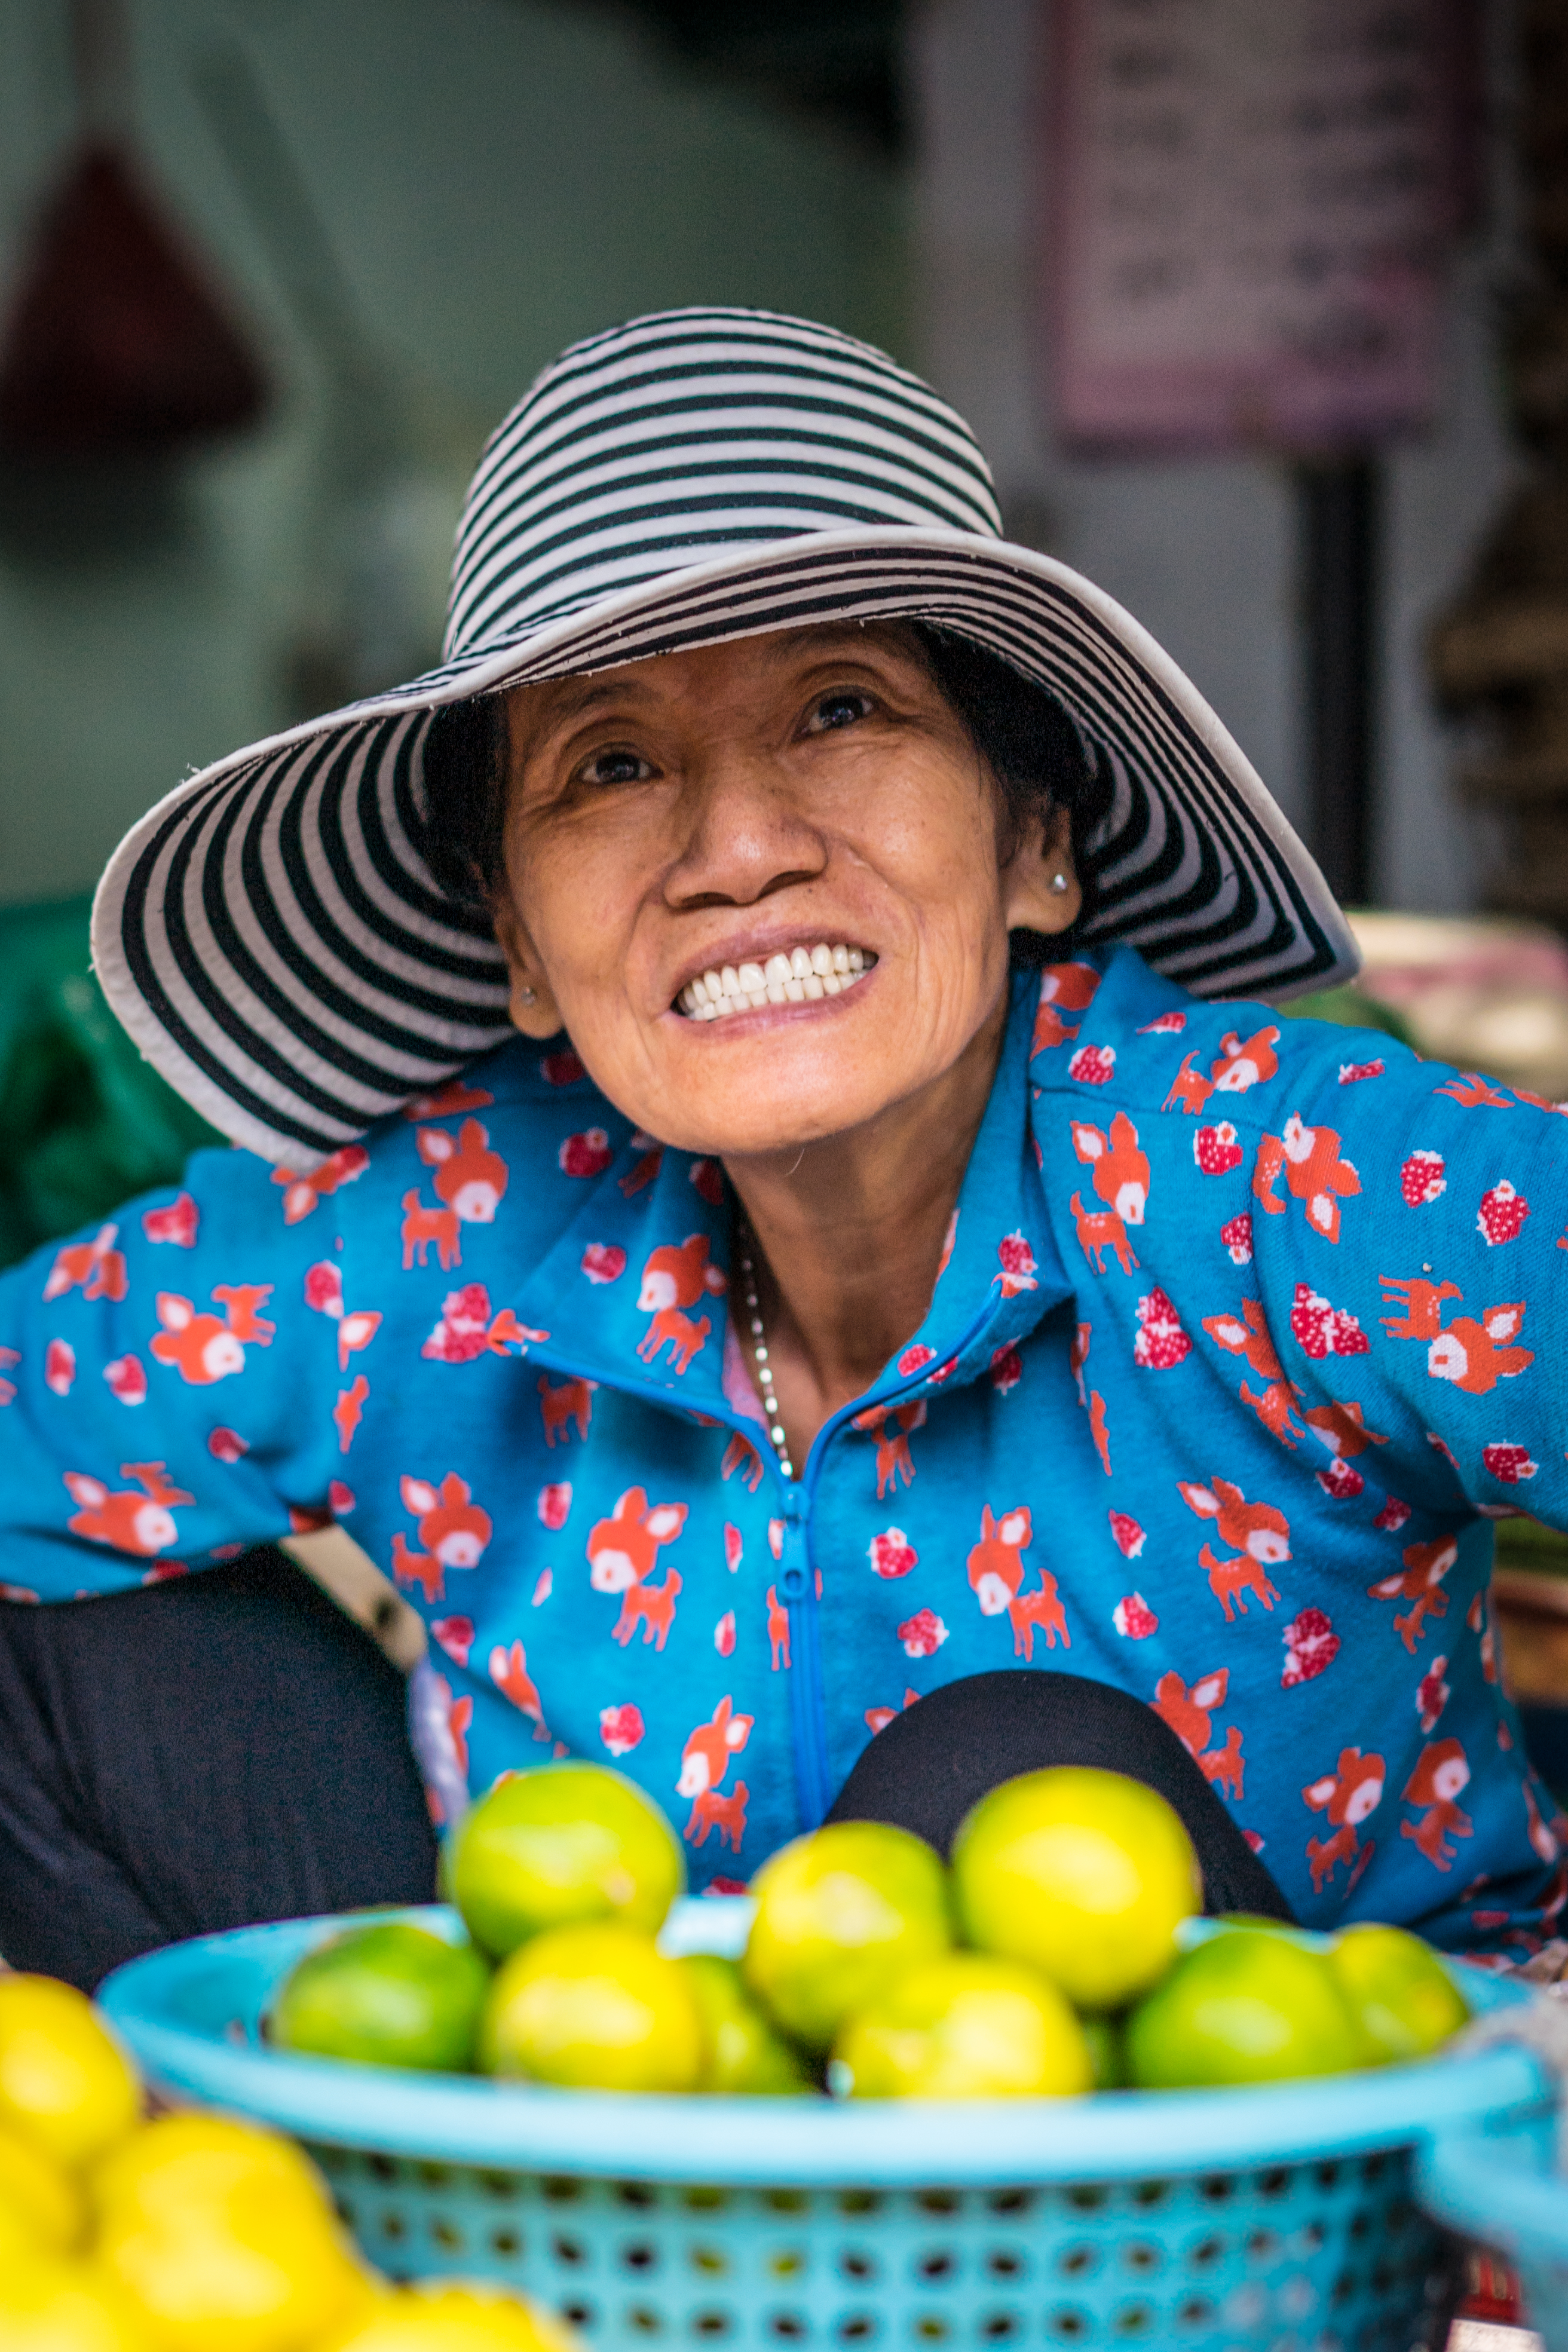 Nothing short of a million dollar smile from this vendor at Tan Dinh market.